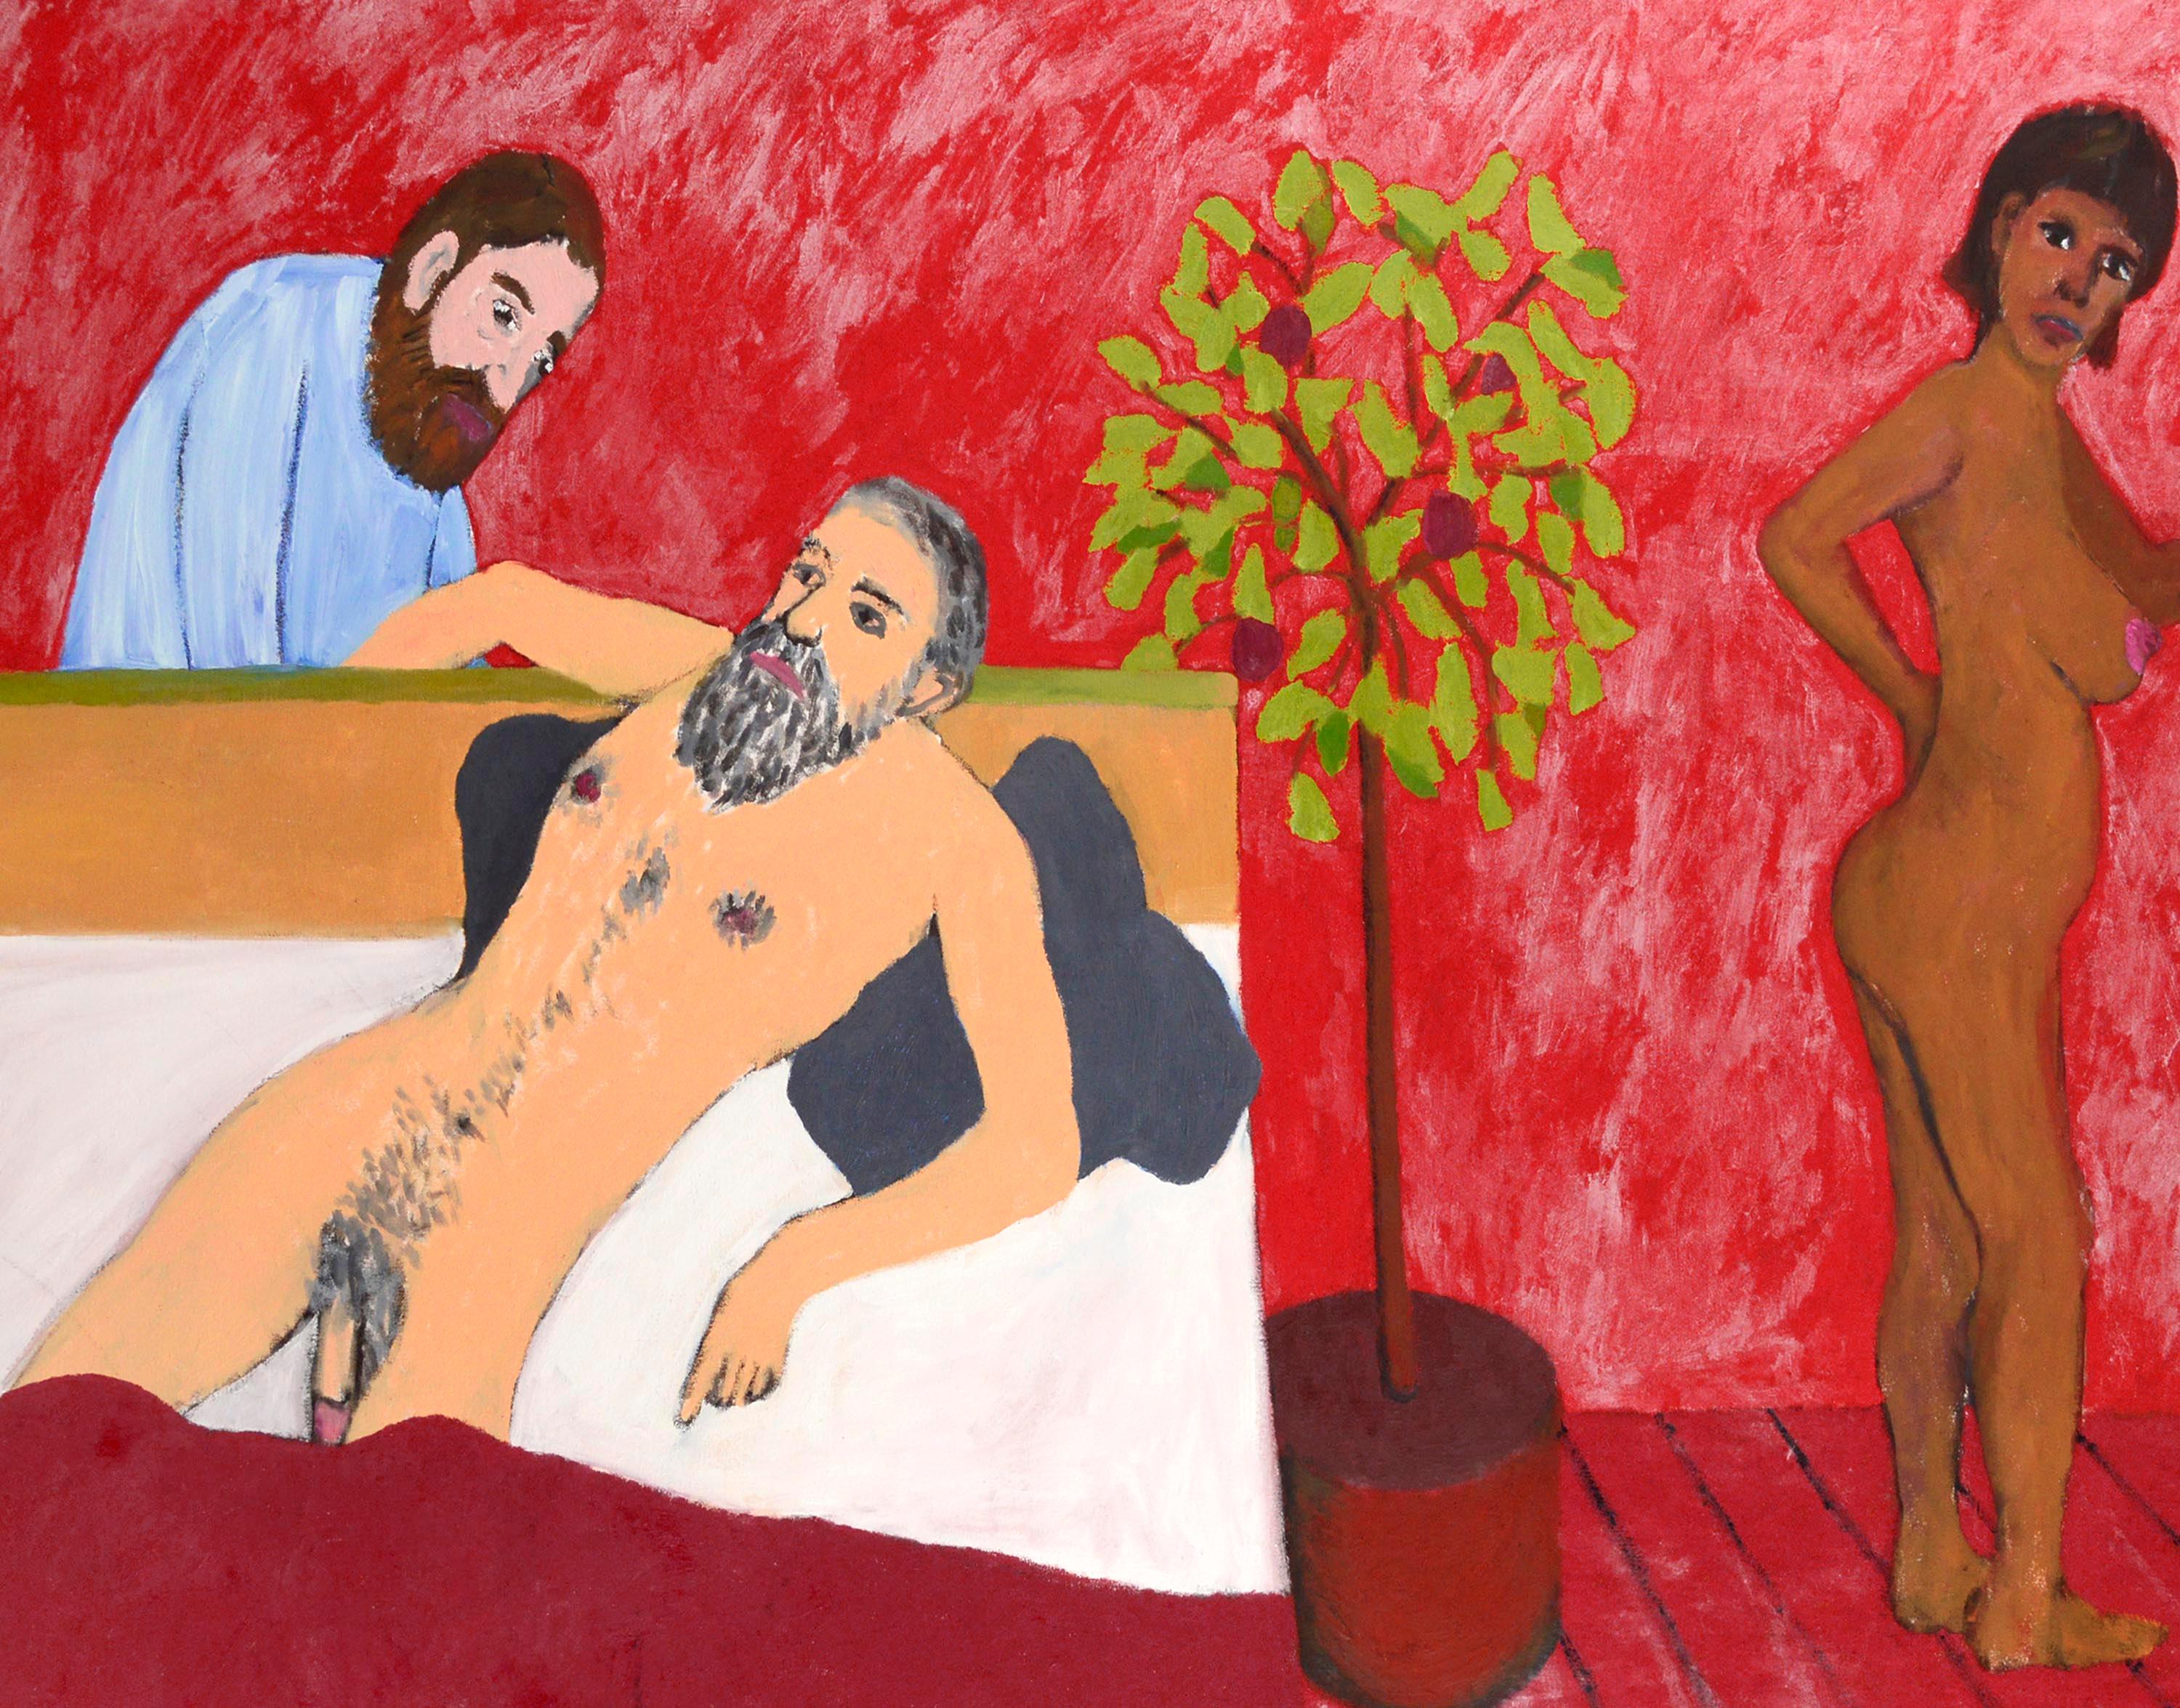 Reclining Nude with Tree, Contemporary Figurative Interior Scene in Red Room - Painting by Michael Pauker 